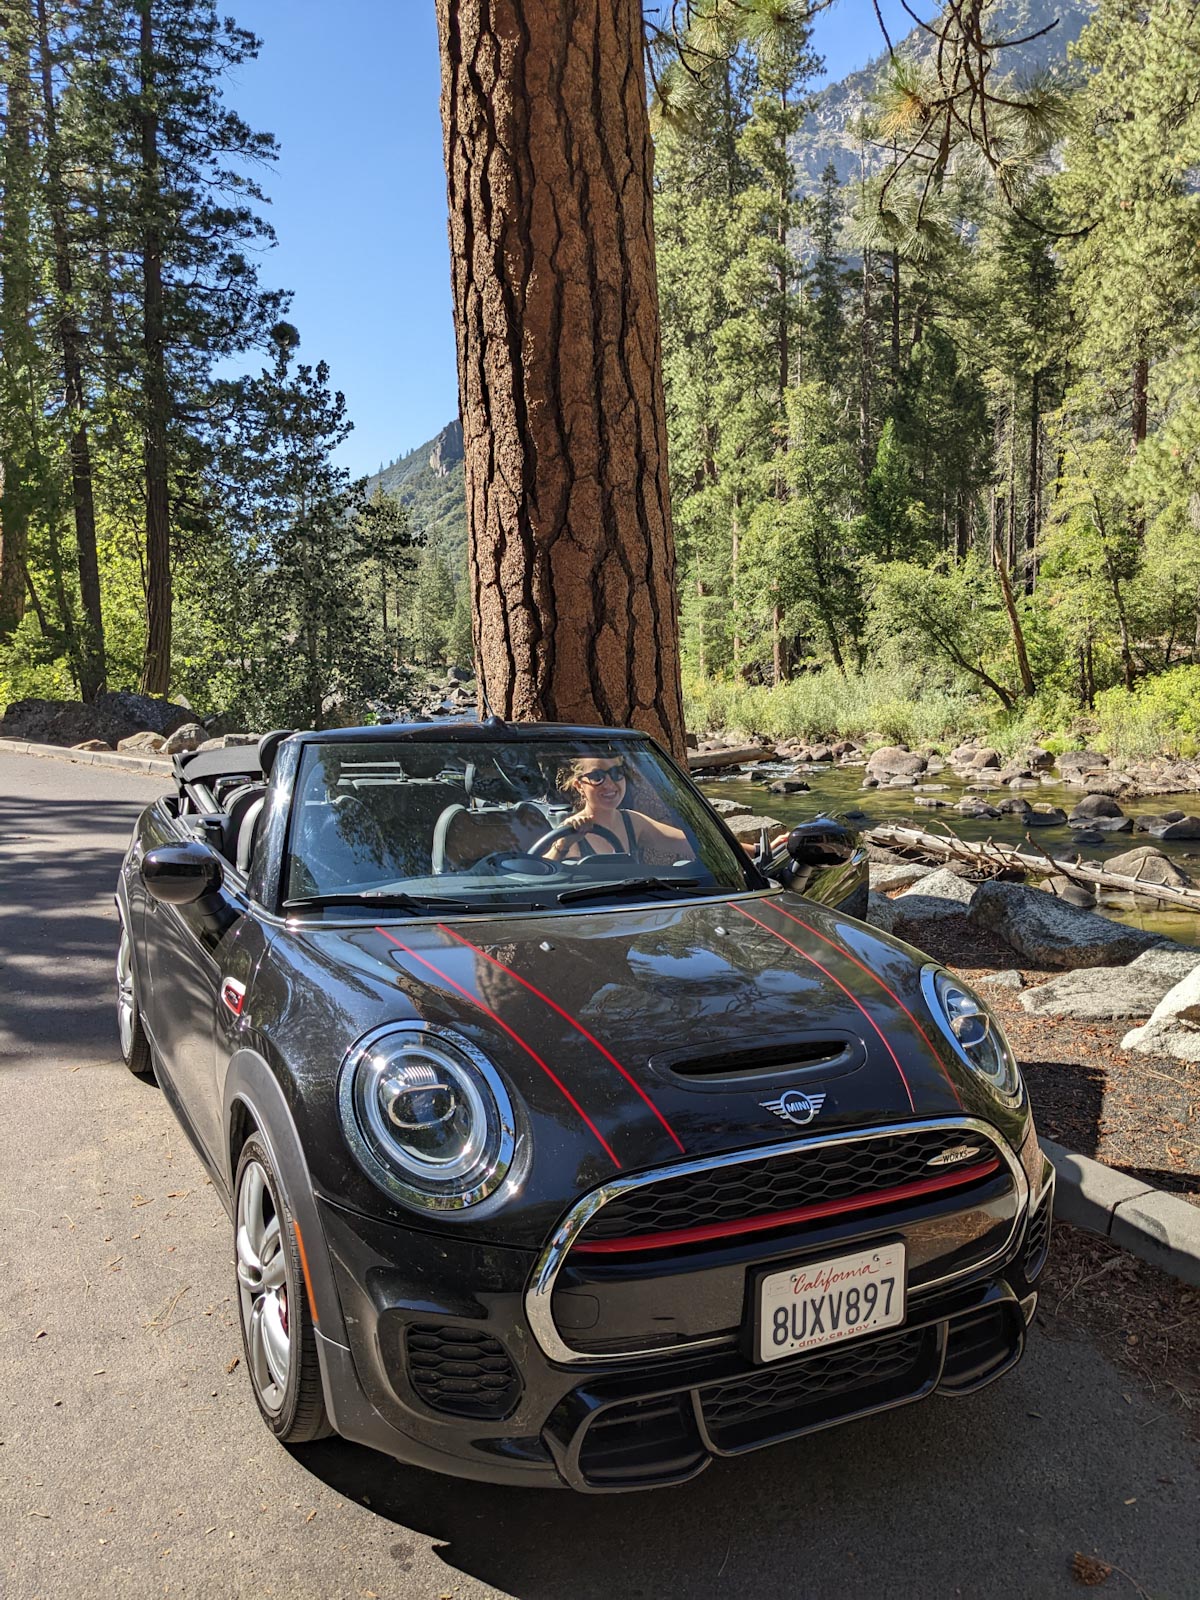 Andrea in the black MINI Convertible with red pinstripes by the Merced River in Yosemite.